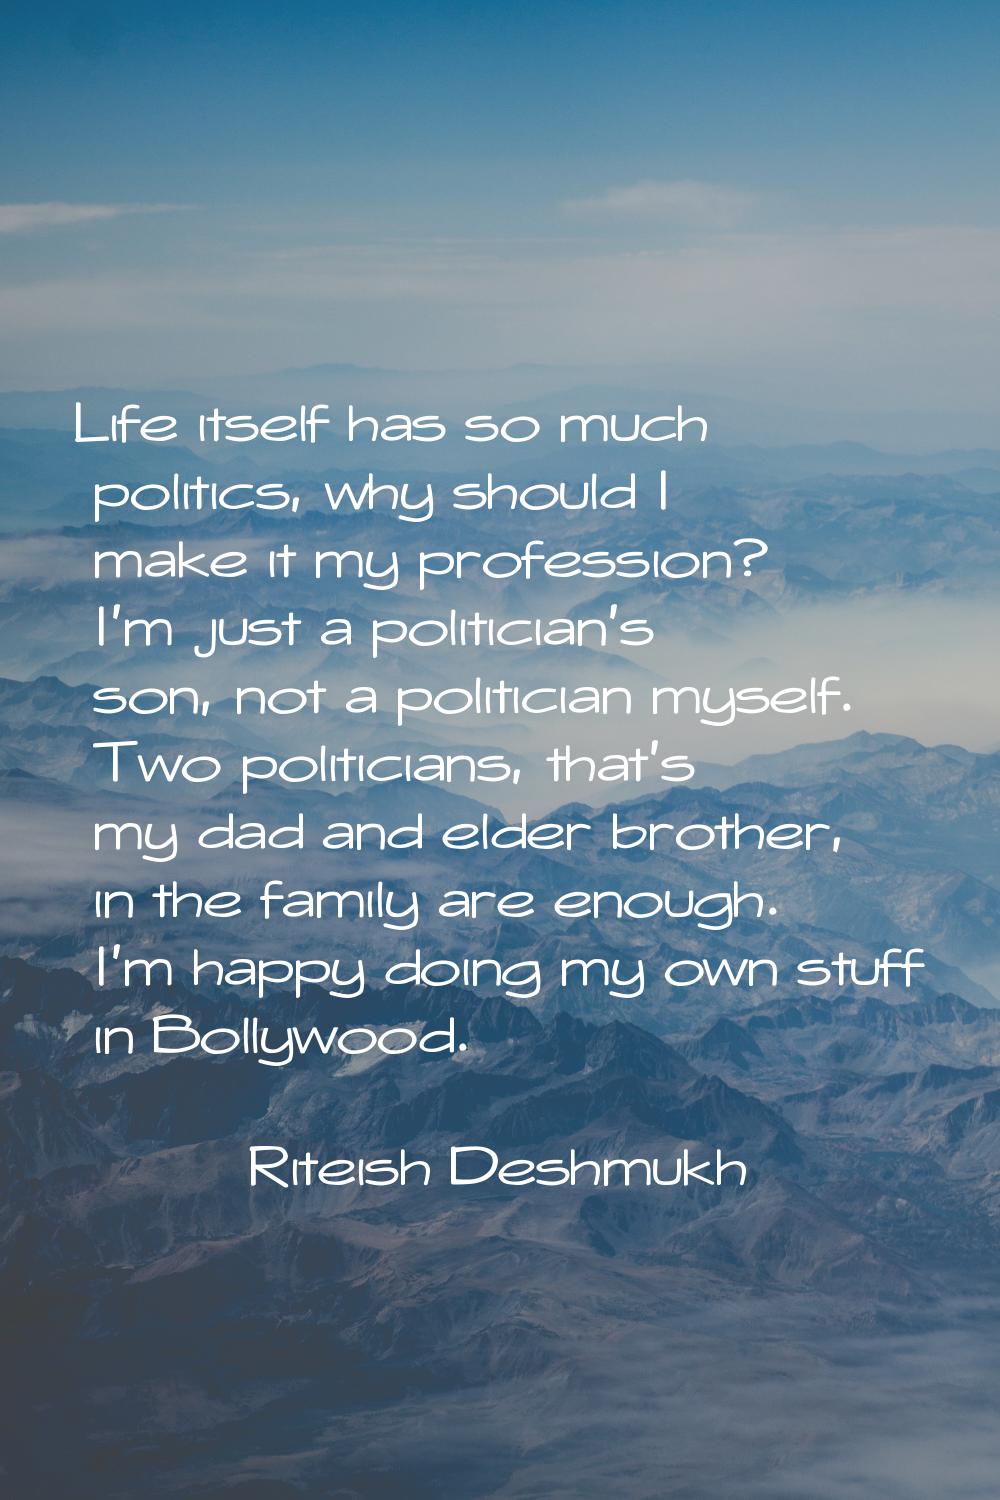 Life itself has so much politics, why should I make it my profession? I'm just a politician's son, 